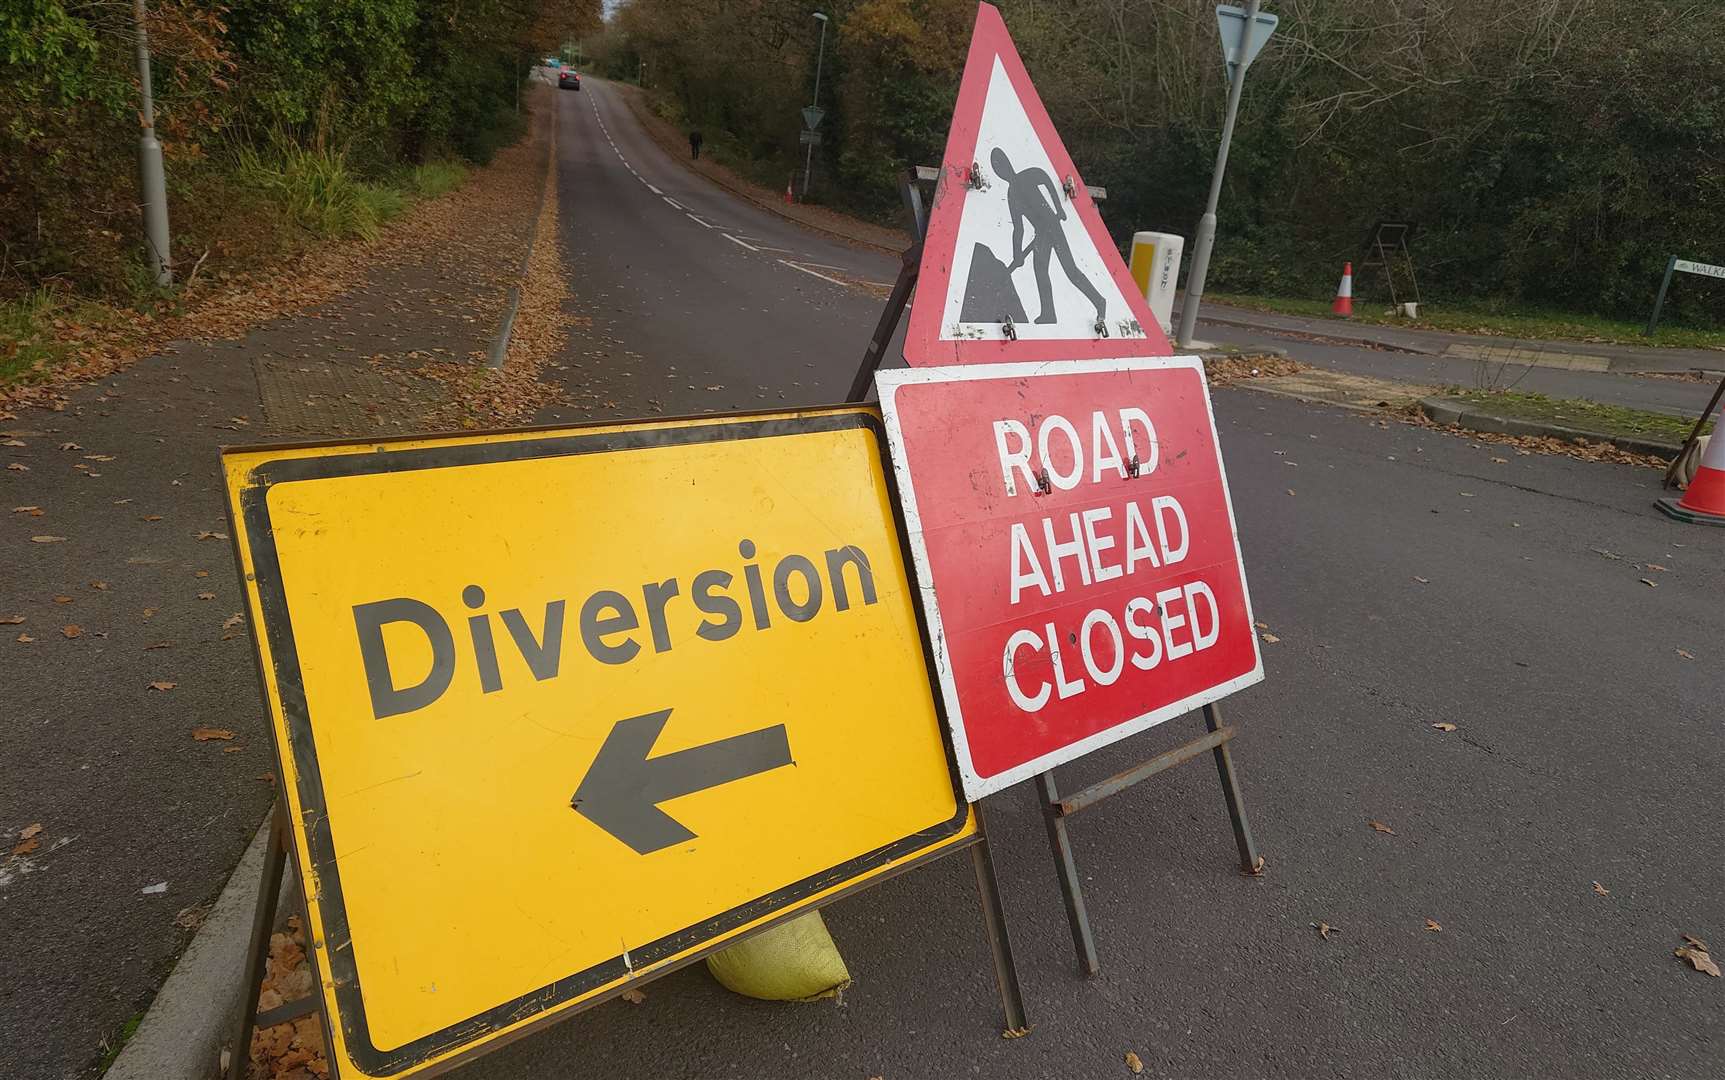 KCC will look to reduce the number of roadworks at peak times on the roads this Christmas period